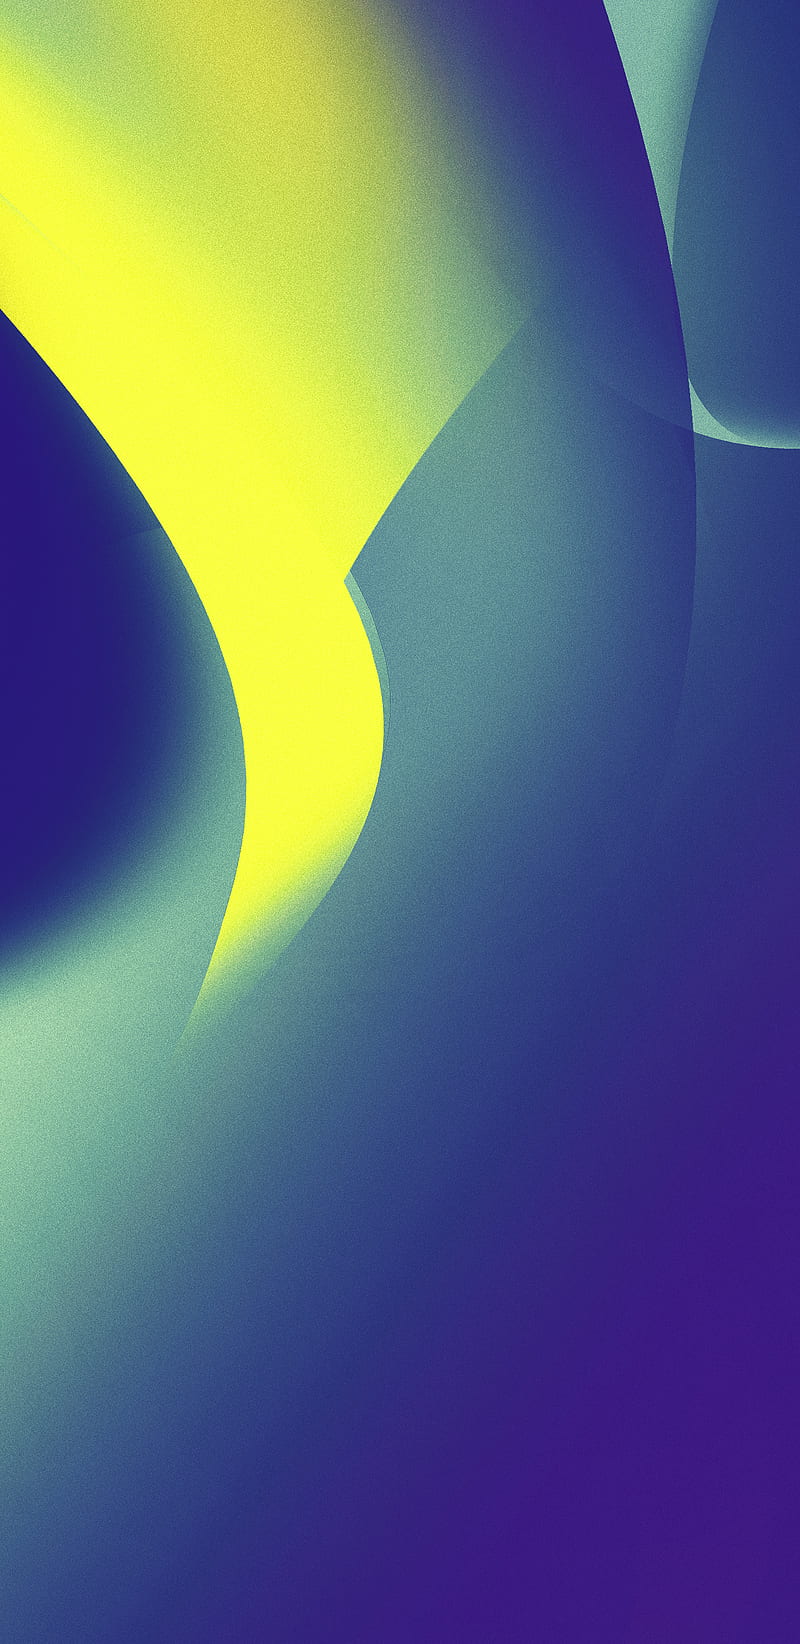 Midnight DefaultC3, abstract, galaxy, galaxy s10, iphone, midnight, night, note, shapes, simple, HD phone wallpaper